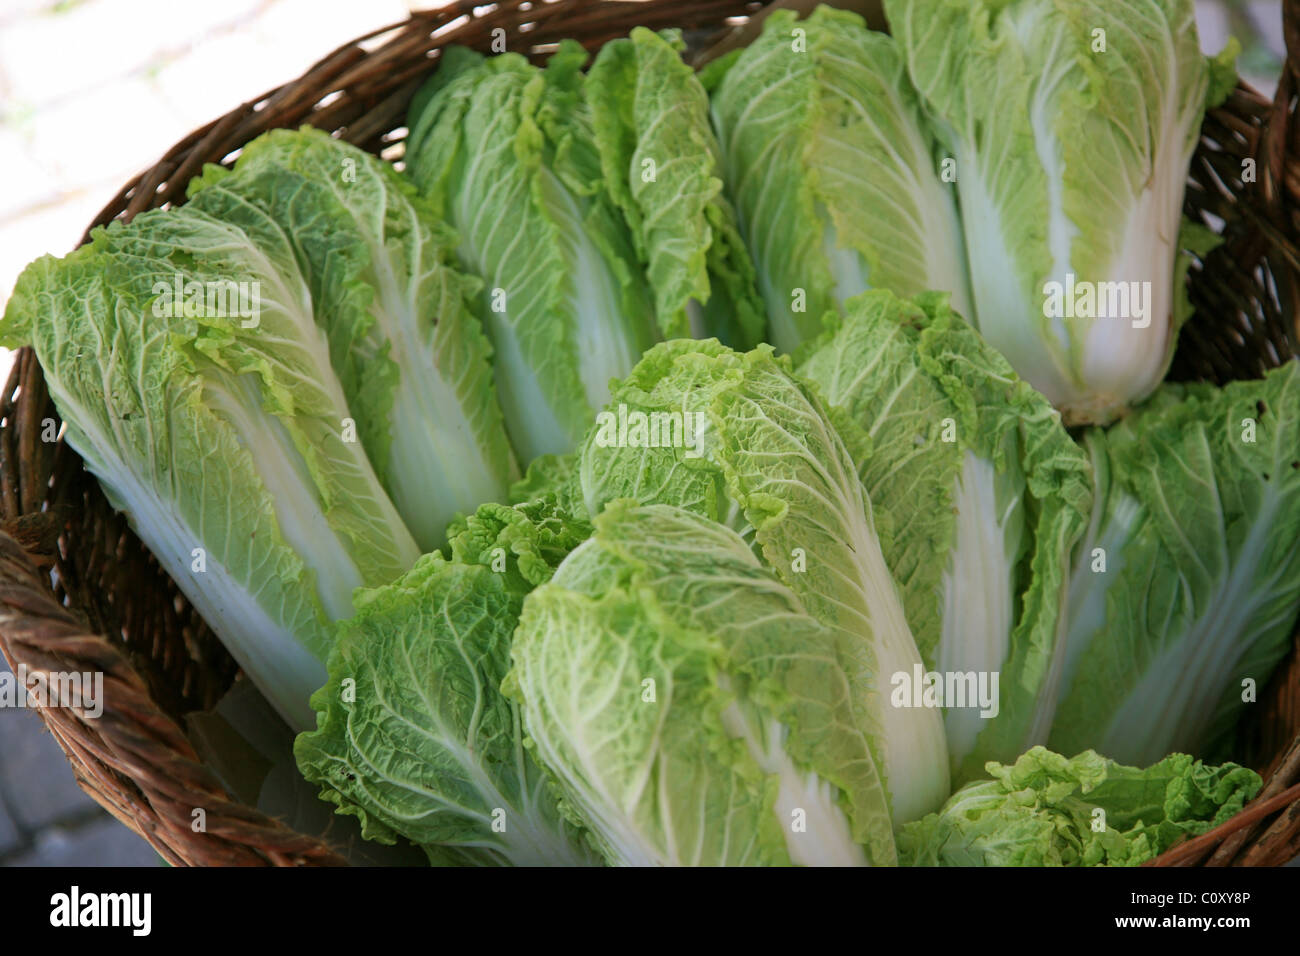 A basket full of Chinese cabbage salad Stock Photo